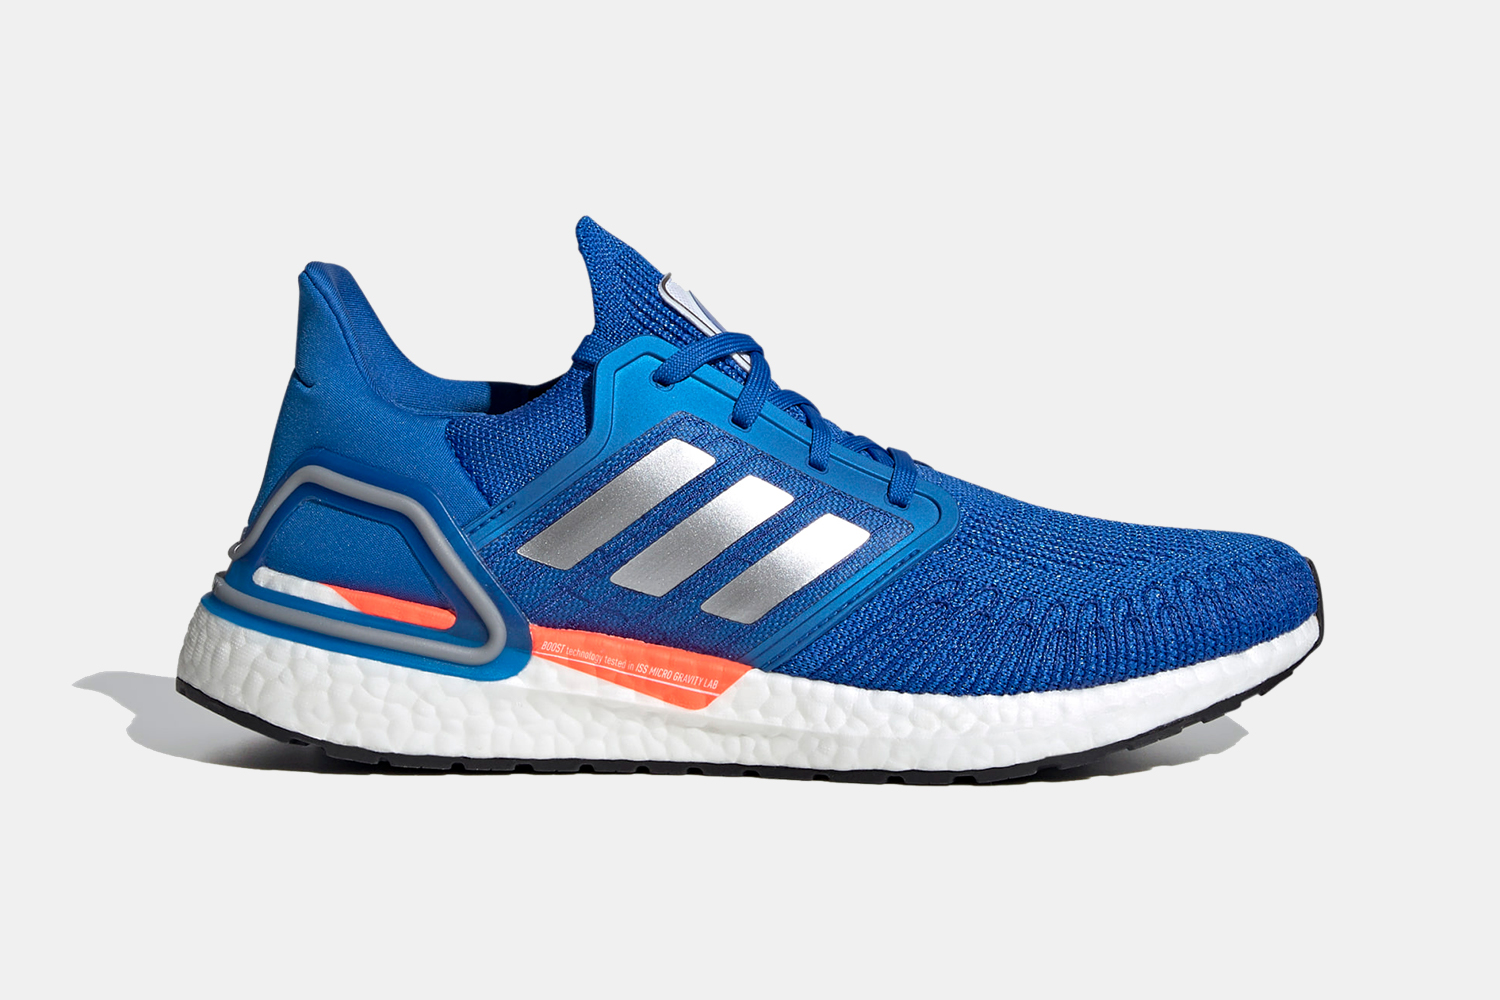 Adidas Ultraboost 20 running shoes in blue with an orange accent